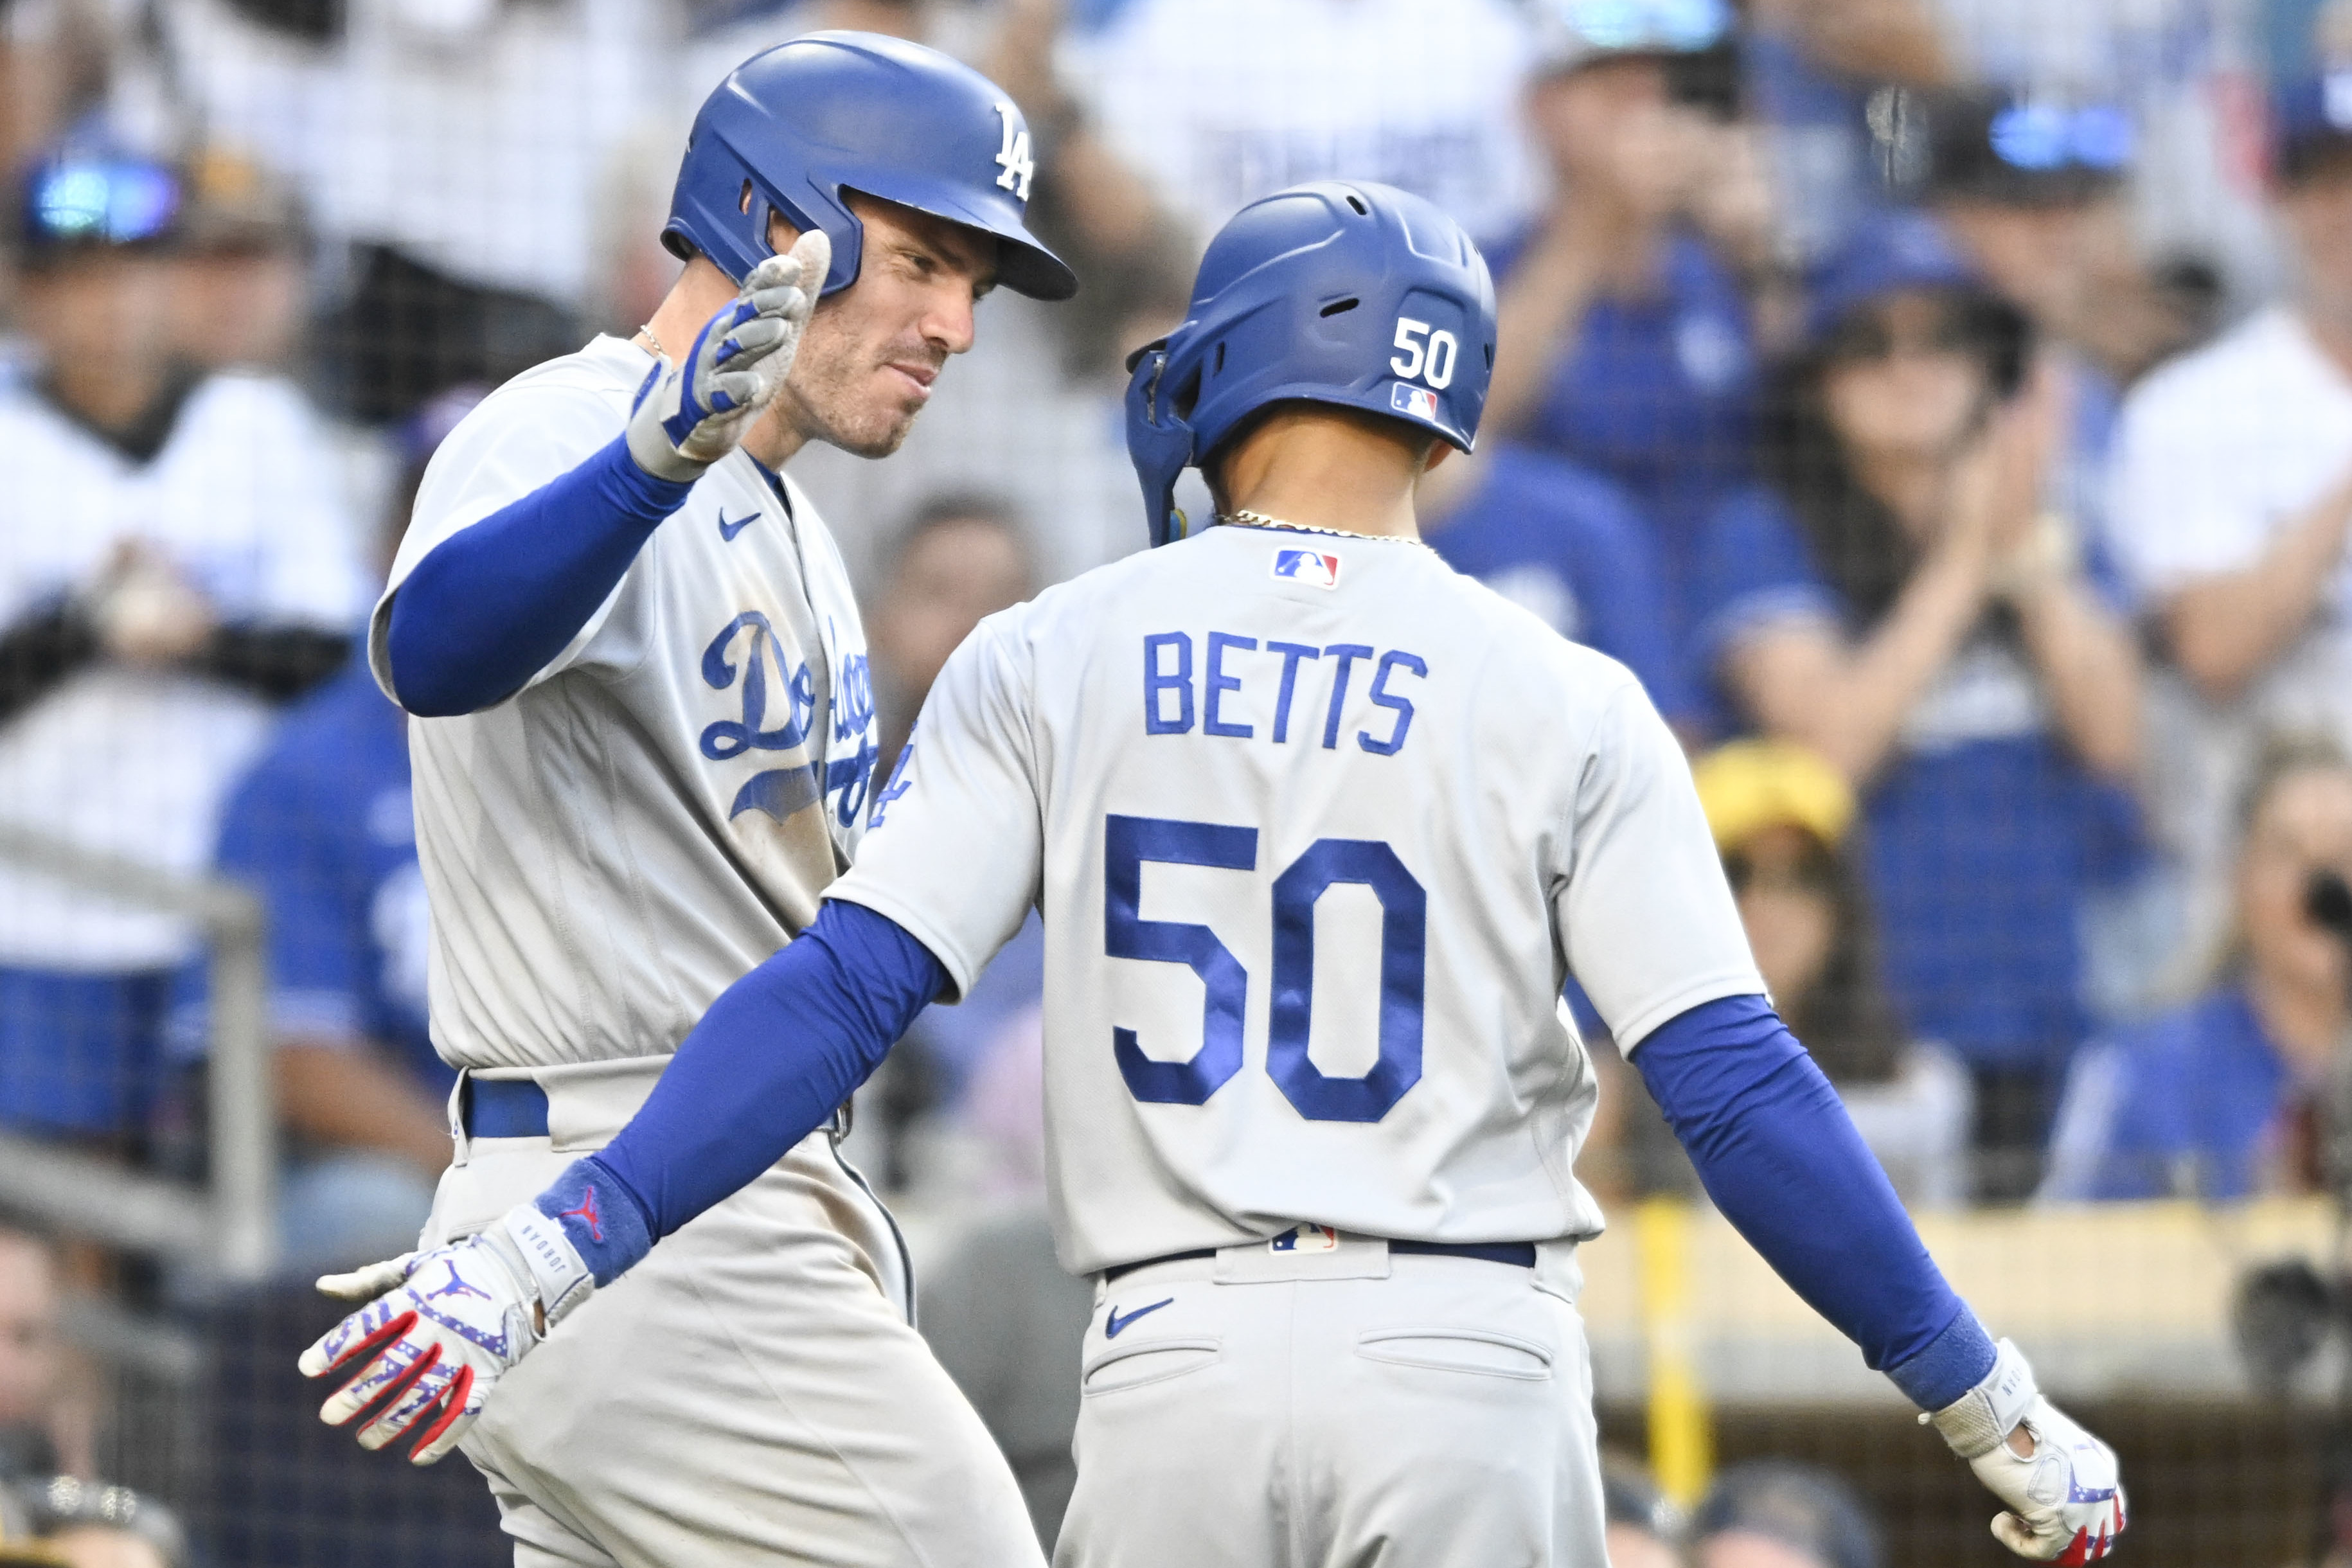 CBS Sports on X: The @Dodgers and @Royals are wearing Negro